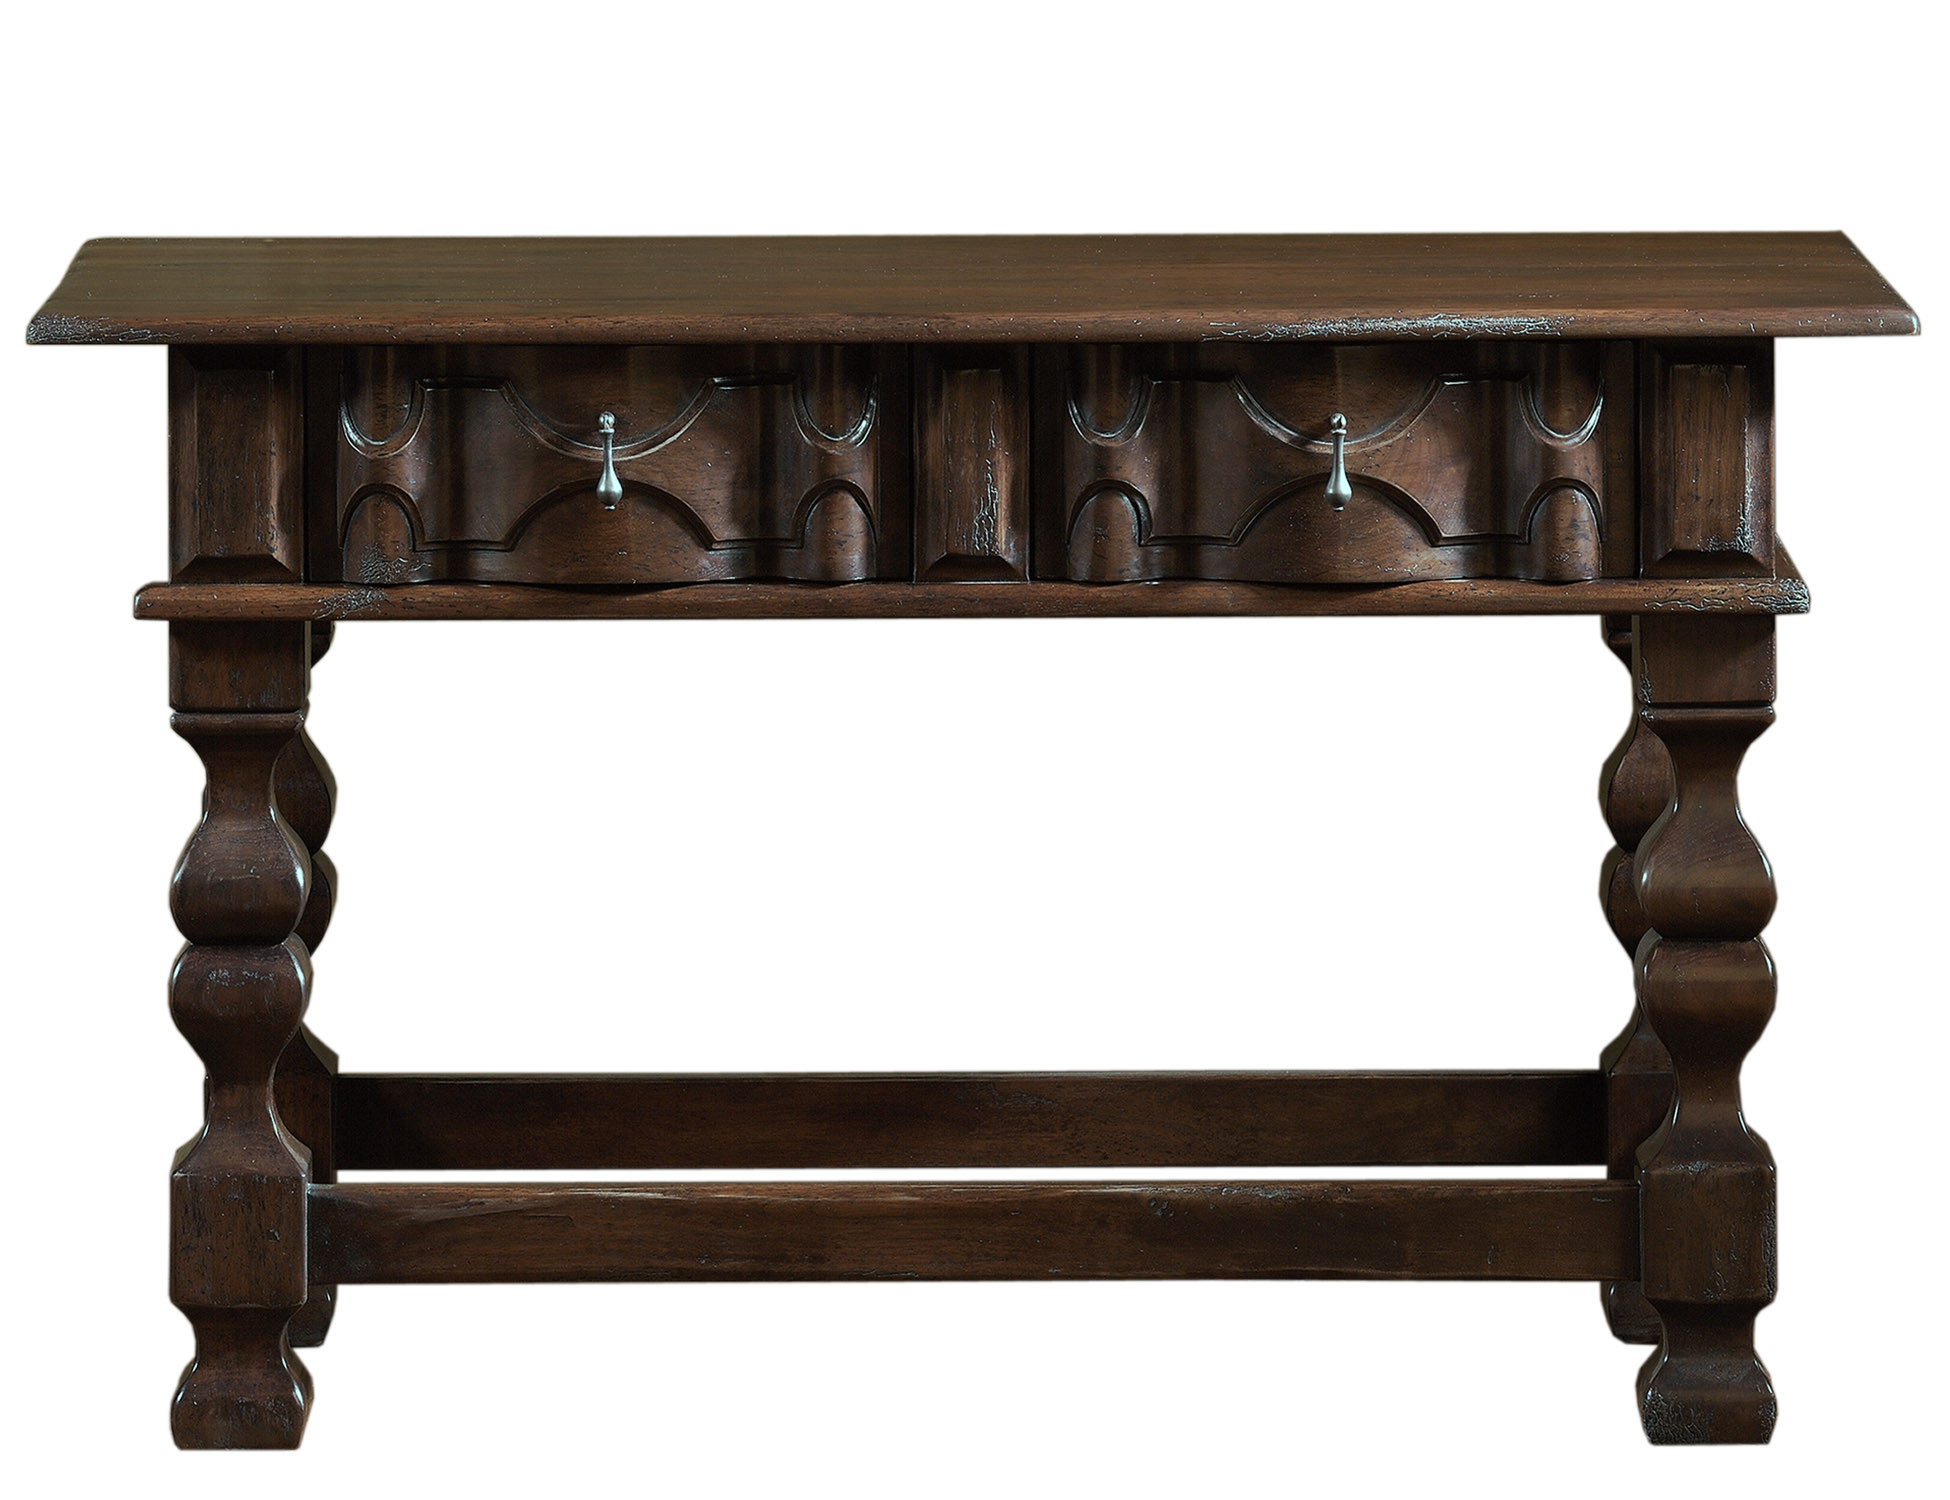 Treviso traditional transitional console sofa table with two drawers by Woodland furniture in Idaho Falls